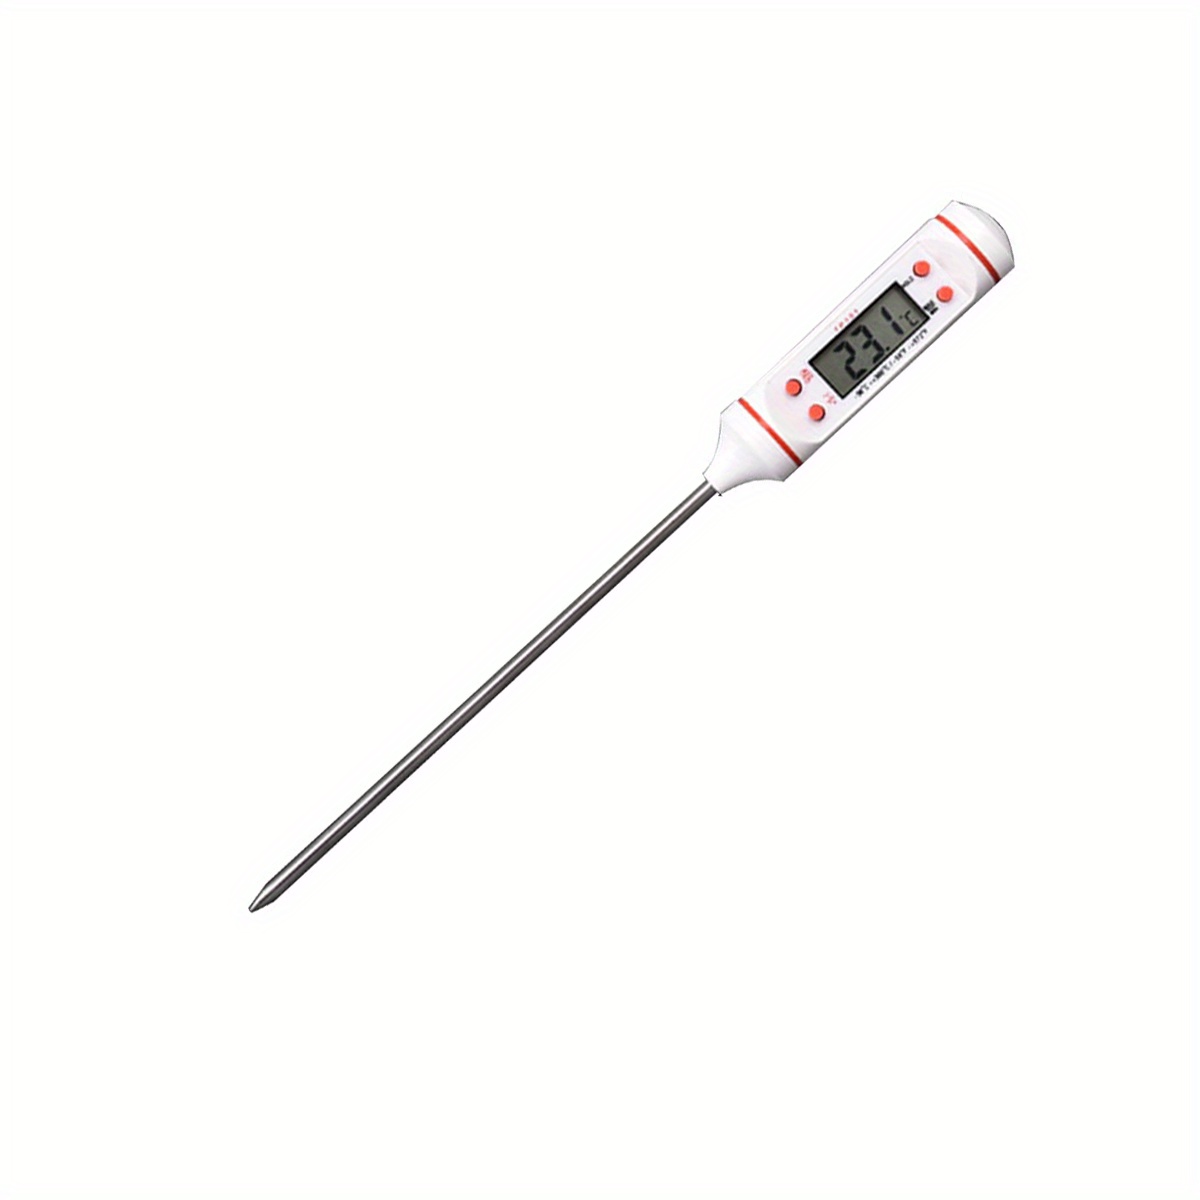 Tp01 Food Baking Digital Thermometer Instant Read Meat Thermometer